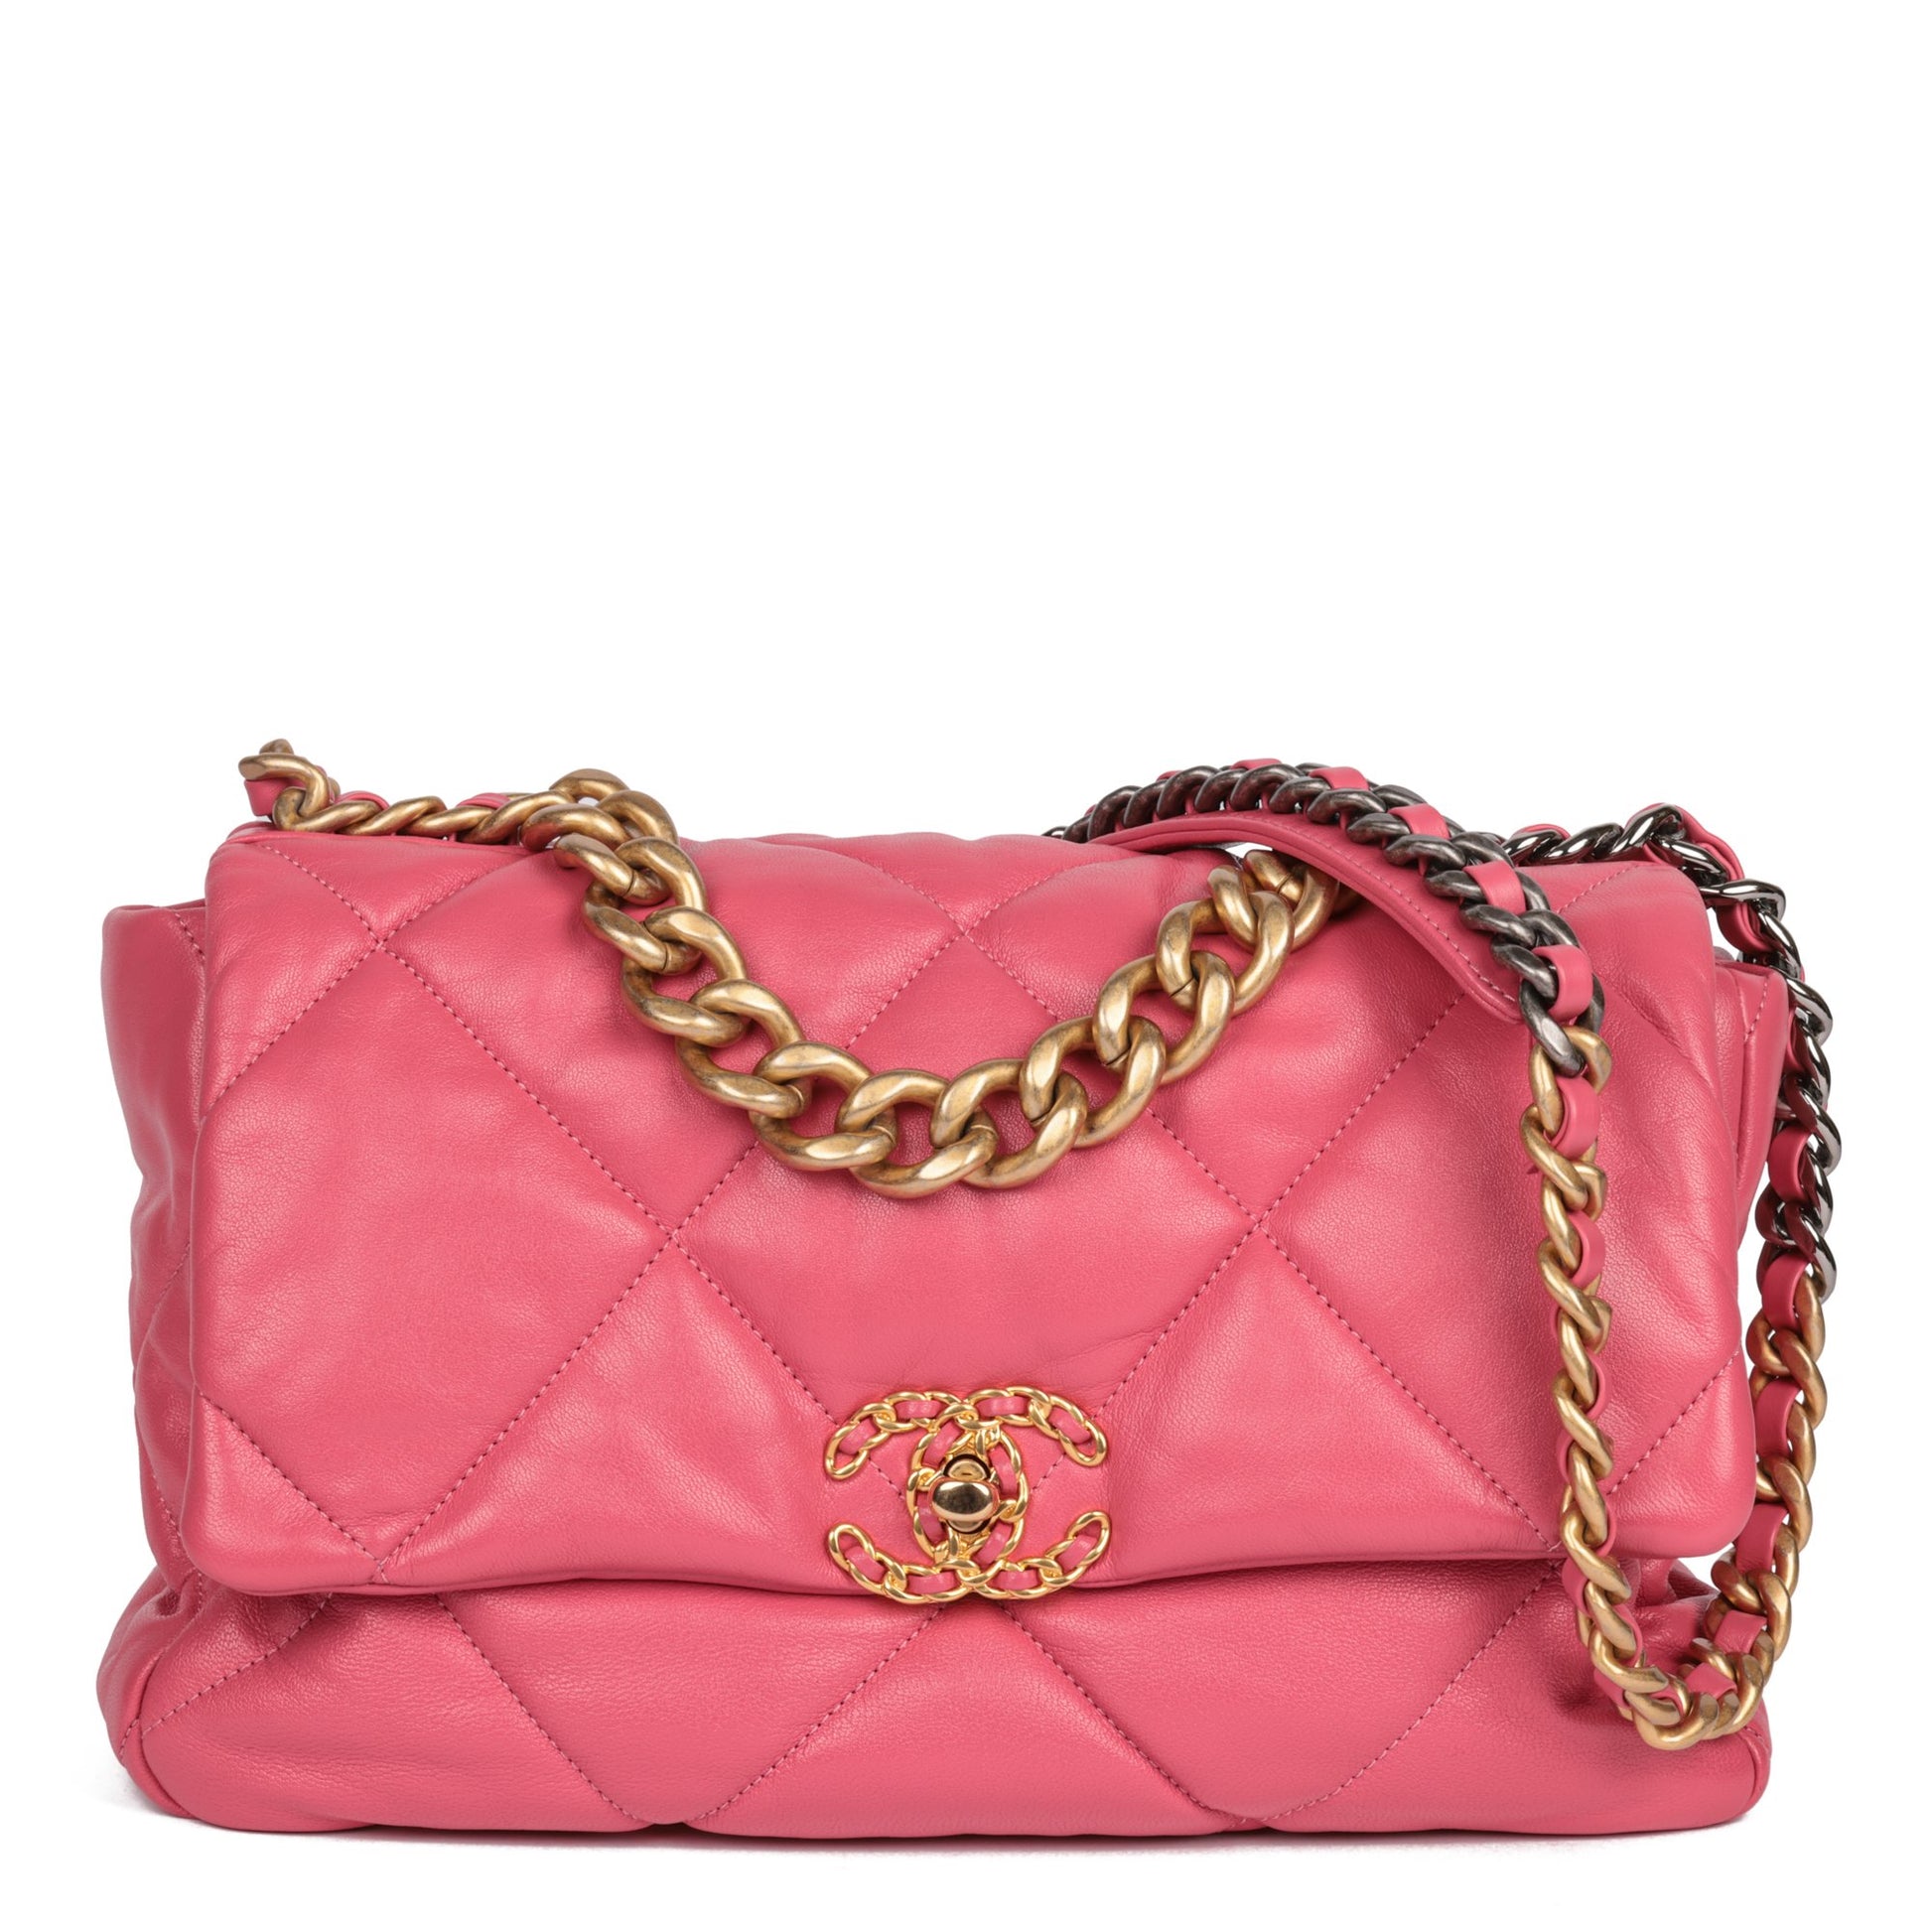 Chanel Pink Quilted Lambskin Large 19 Flap Bag